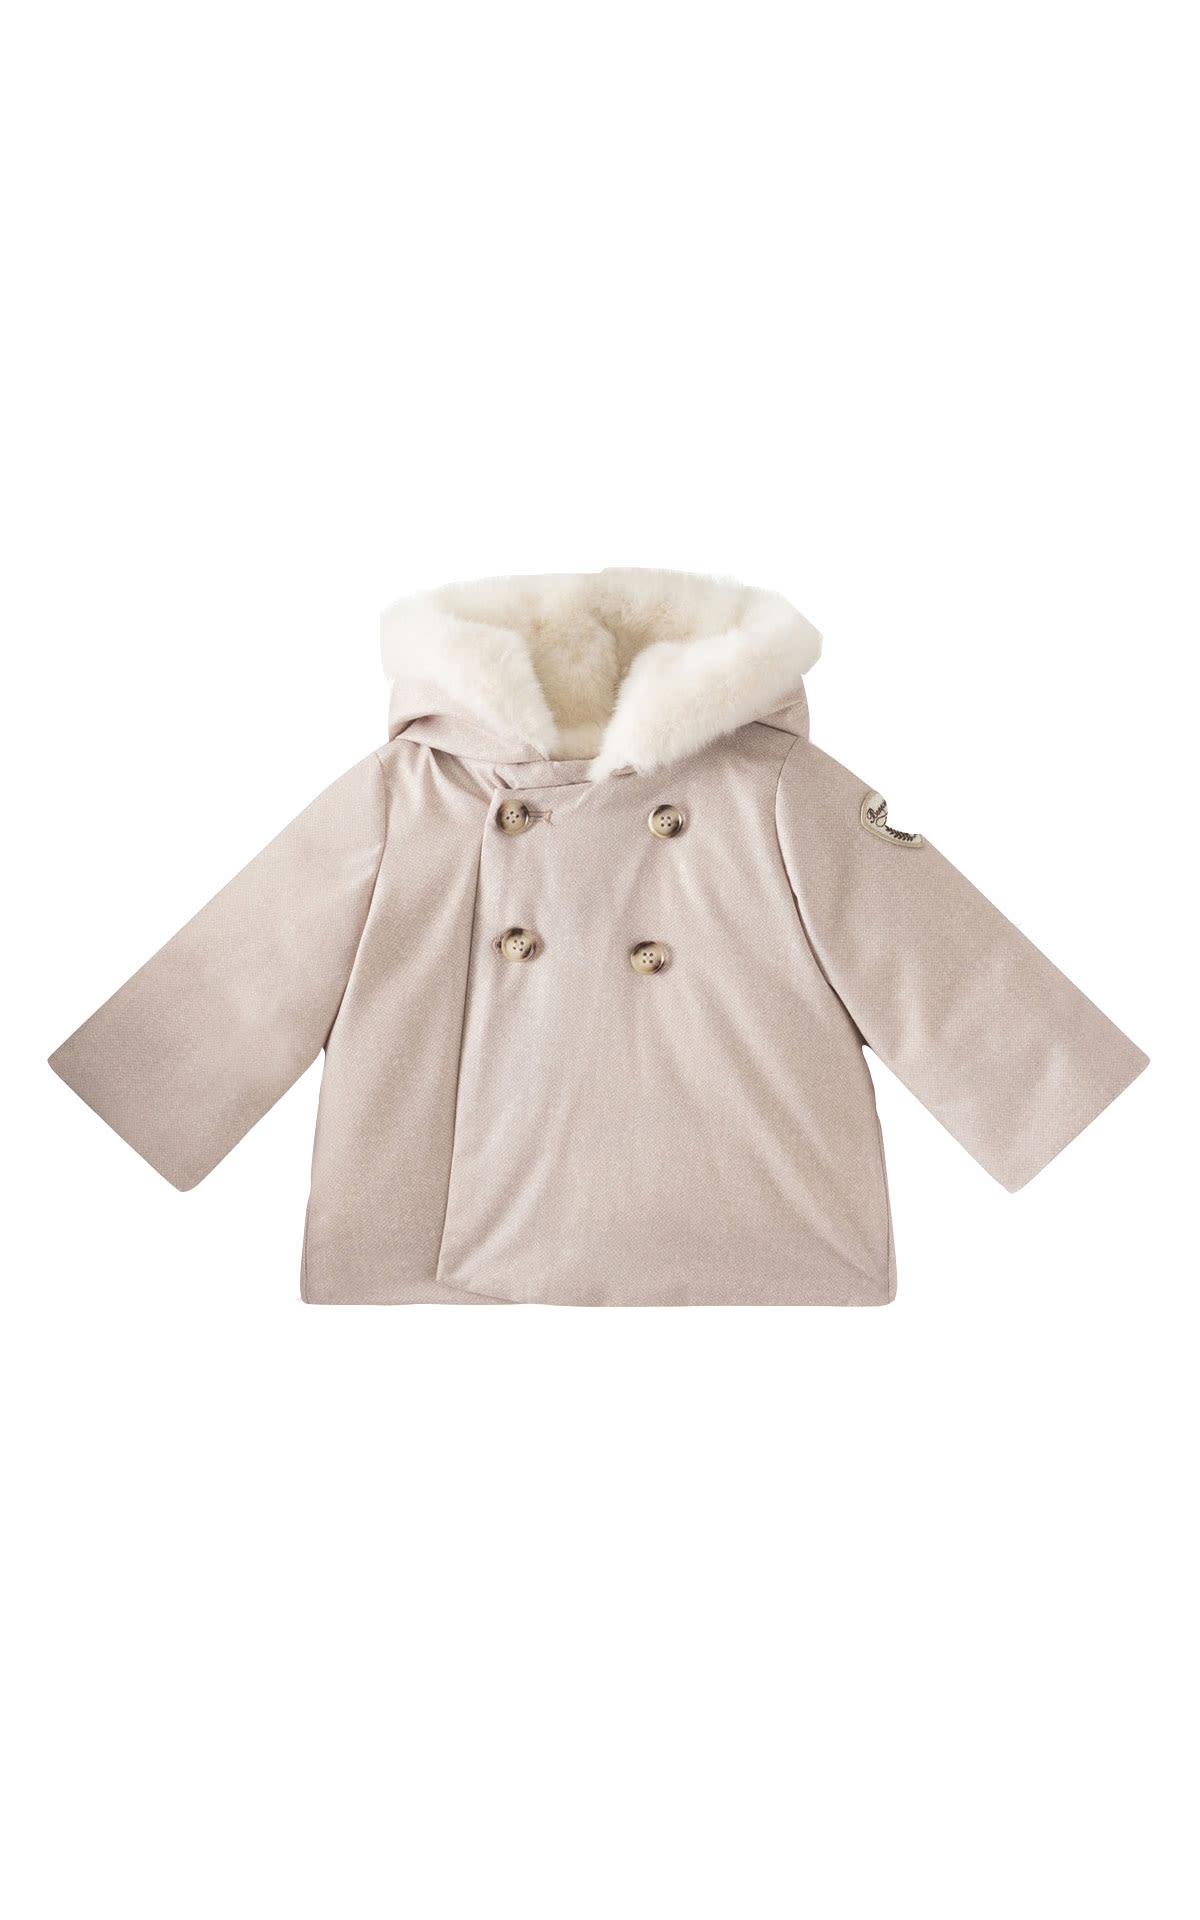 Bonpoint Baby hooded jacket from Bicester Village